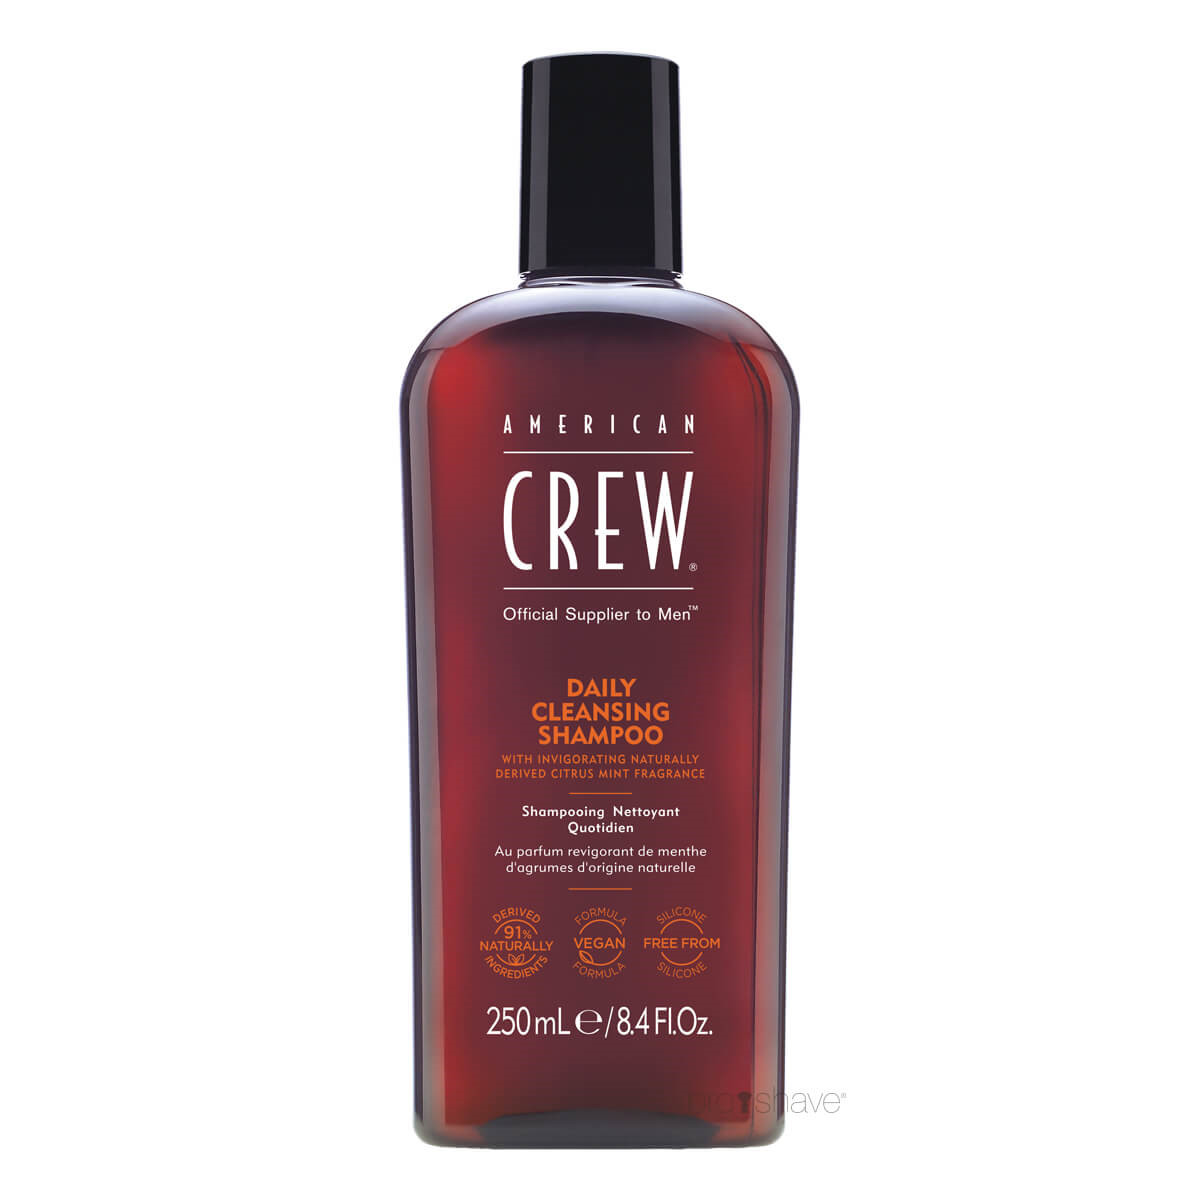 10: American Crew Daily Cleansing Shampoo, 250 ml.